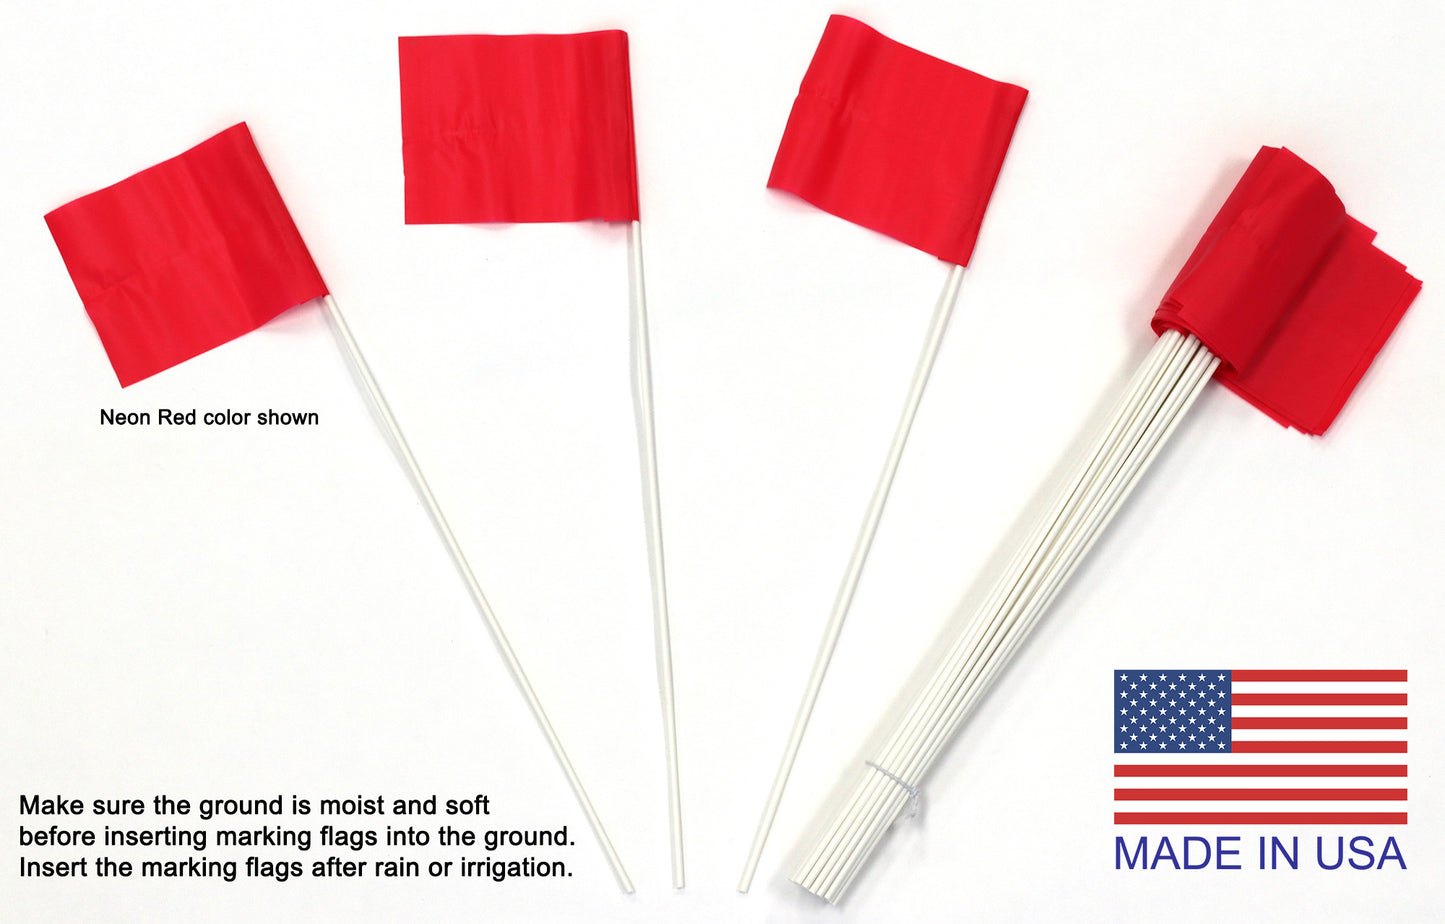 Stake Flags for Marking Sprinkler Heads and Other Objects